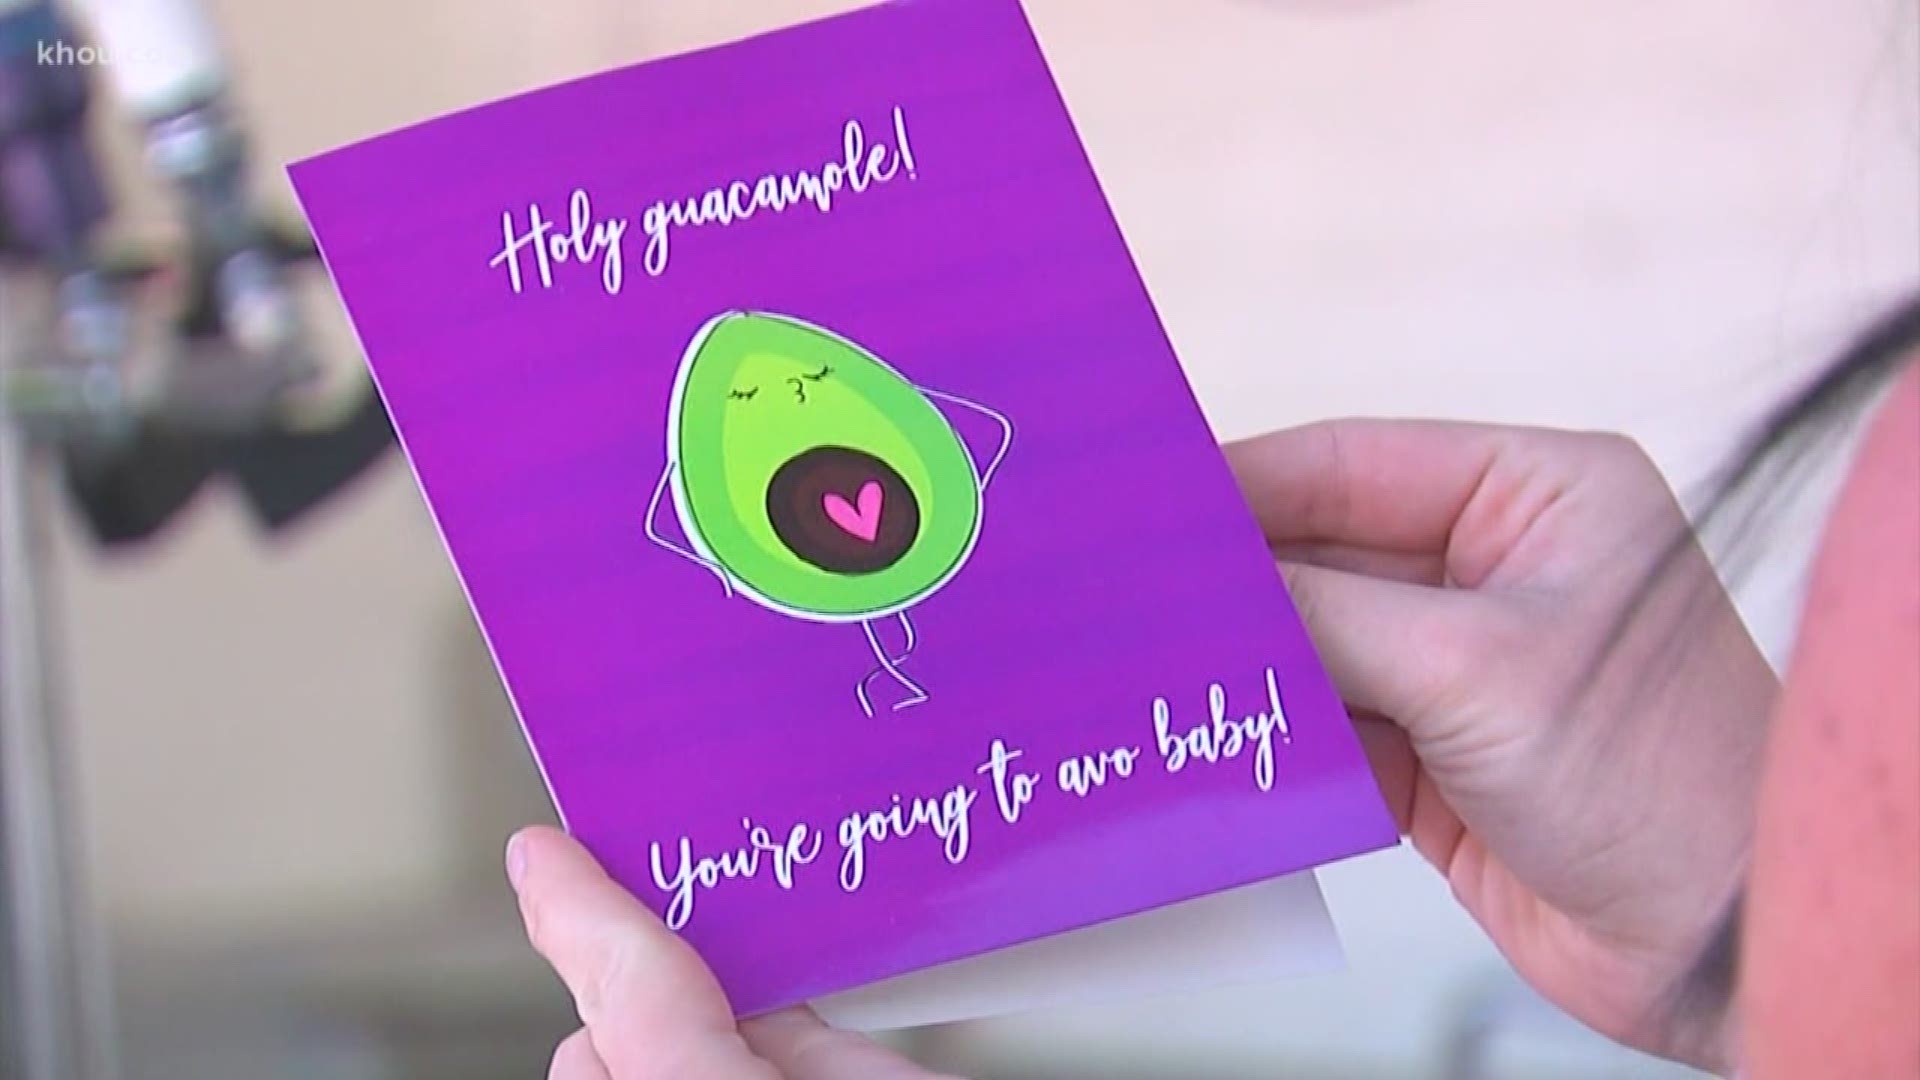 Renee Johnson is a new mom who recently found this in her mailbox: a card featuring an avocado saying "holy guacamole, you're going to 'avo' baby."